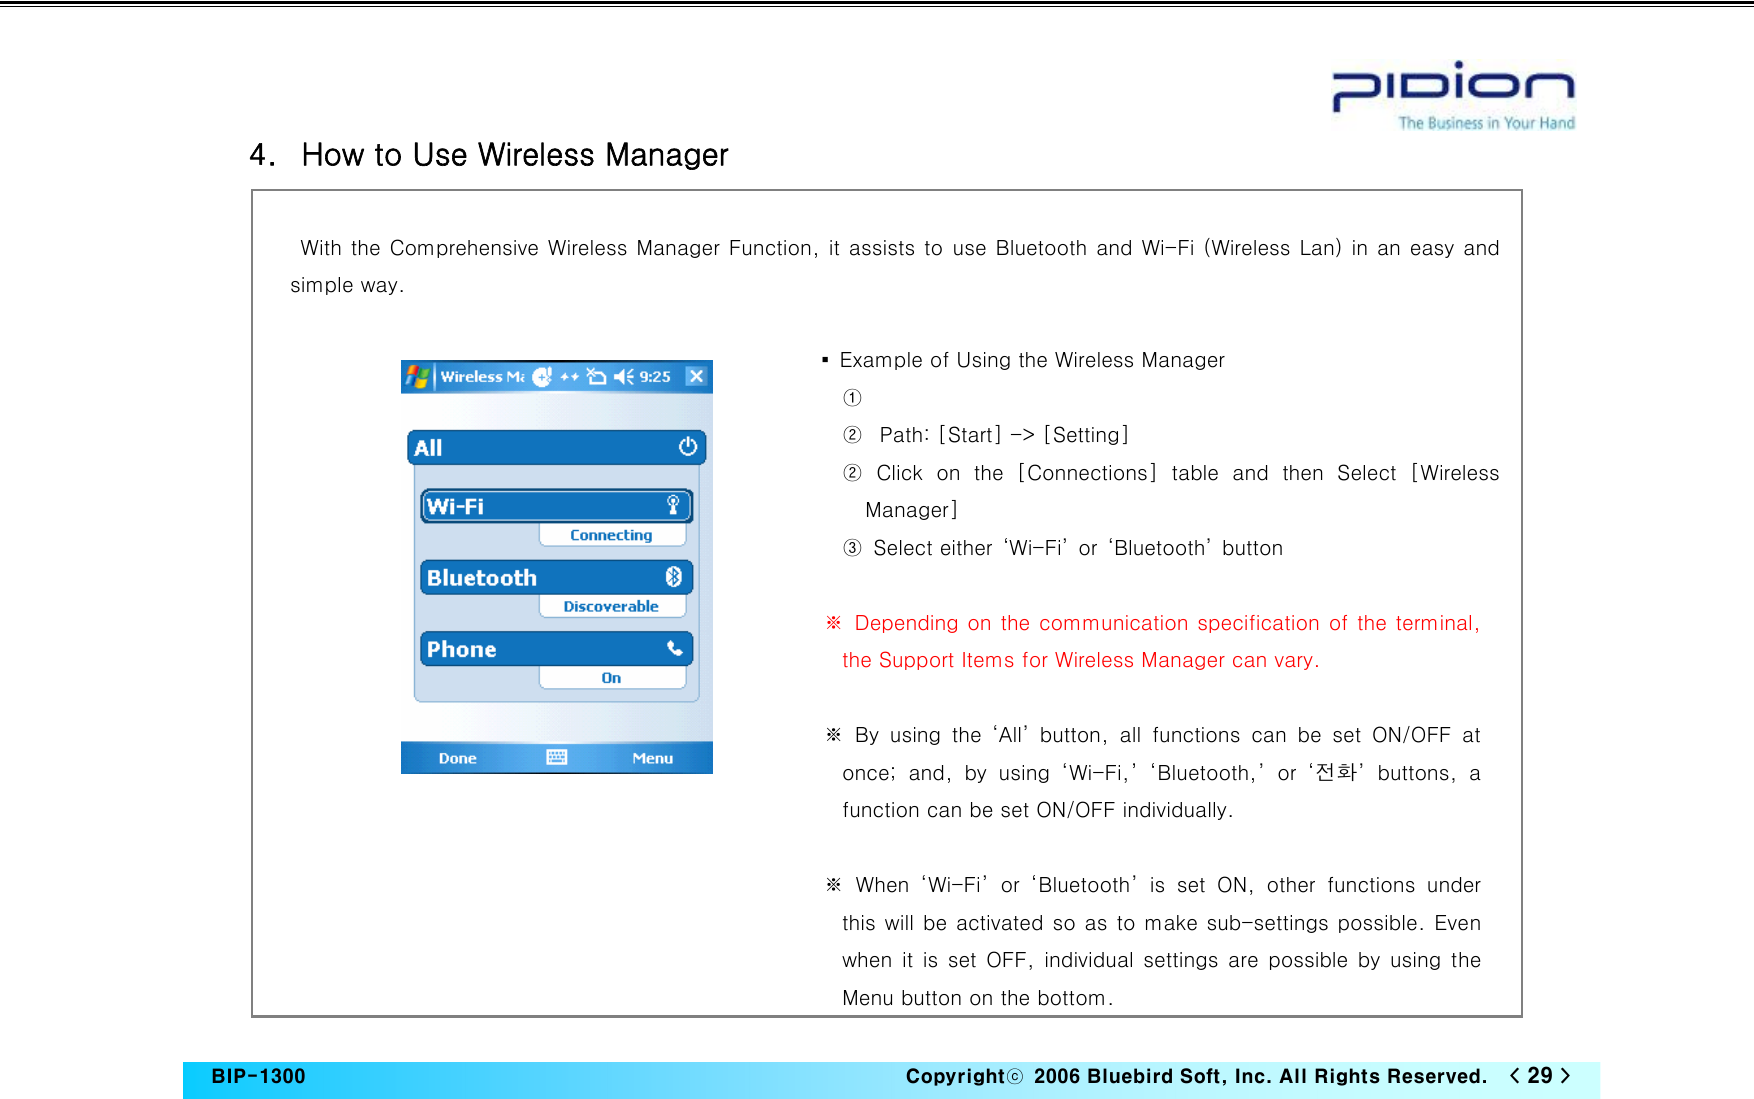   BIP-1300                                                                   Copyrightⓒ  2006 Bluebird Soft, Inc. All Rights Reserved.   &lt; 29 &gt;    4.   How to Use Wireless Manager  With the Comprehensive Wireless Manager Function, it assists to use Bluetooth and Wi-Fi (Wireless Lan) in an easy and simple way.  ▪  Example of Using the Wireless Manager   ①  ② Path: [Start] -&gt; [Setting] ②  Click  on  the  [Connections]  table  and  then  Select  [Wireless Manager] ③  Select either  ‘Wi-Fi’  or  ‘Bluetooth’  button  ※  Depending on the communication specification of the terminal, the Support Items for Wireless Manager can vary.  ※ By using the ‘All’ button, all functions can be set ON/OFF at once;  and,  by  using  ‘Wi-Fi,’  ‘Bluetooth,’  or  ‘전화’  buttons,  a function can be set ON/OFF individually.  ※  When  ‘Wi-Fi’  or  ‘Bluetooth’  is  set  ON,  other  functions  under this will be activated so as to make sub-settings possible. Even when it is set OFF, individual settings are possible by using the Menu button on the bottom. 